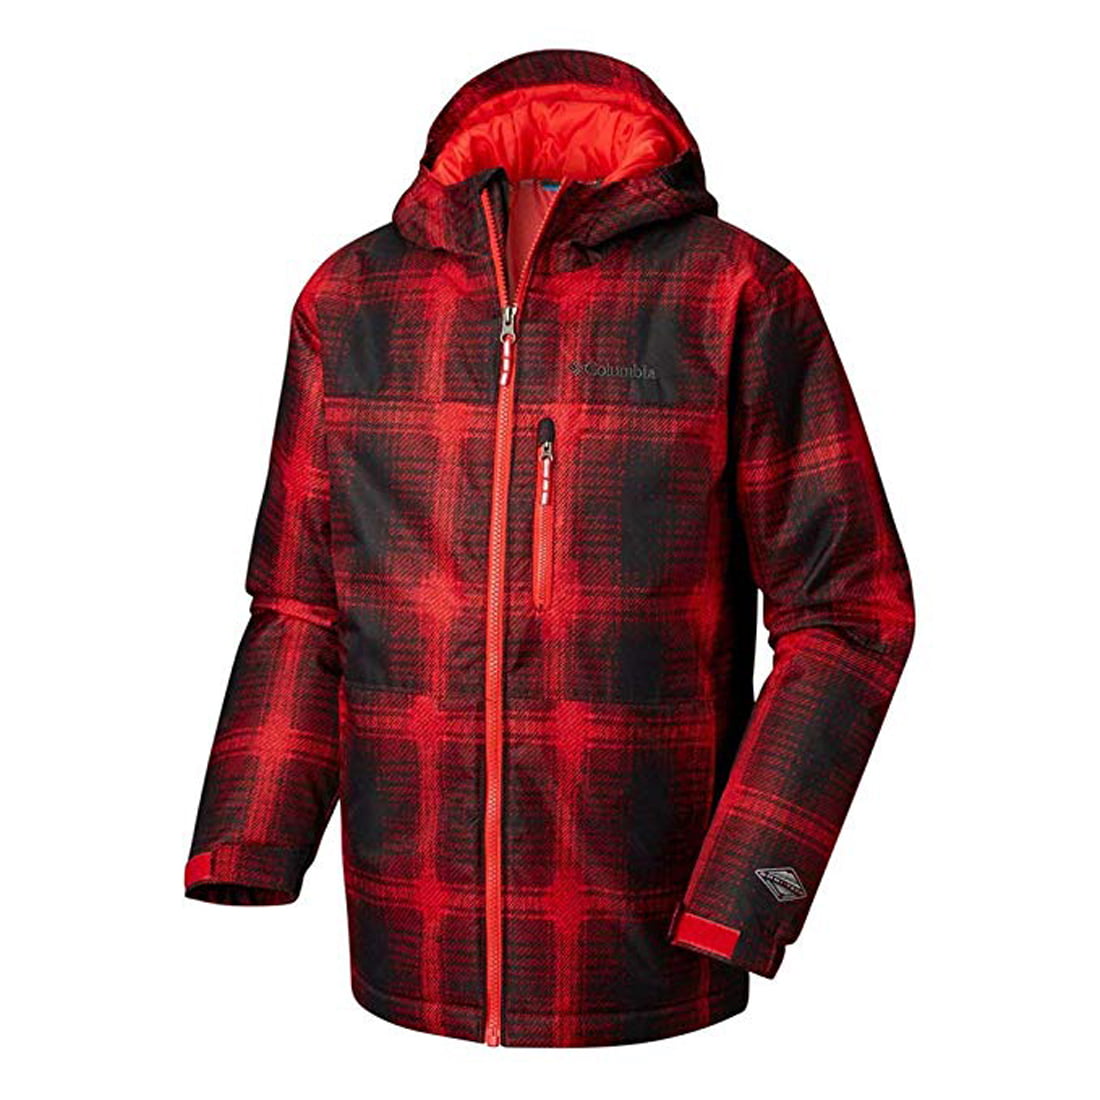 columbia red and black plaid jacket